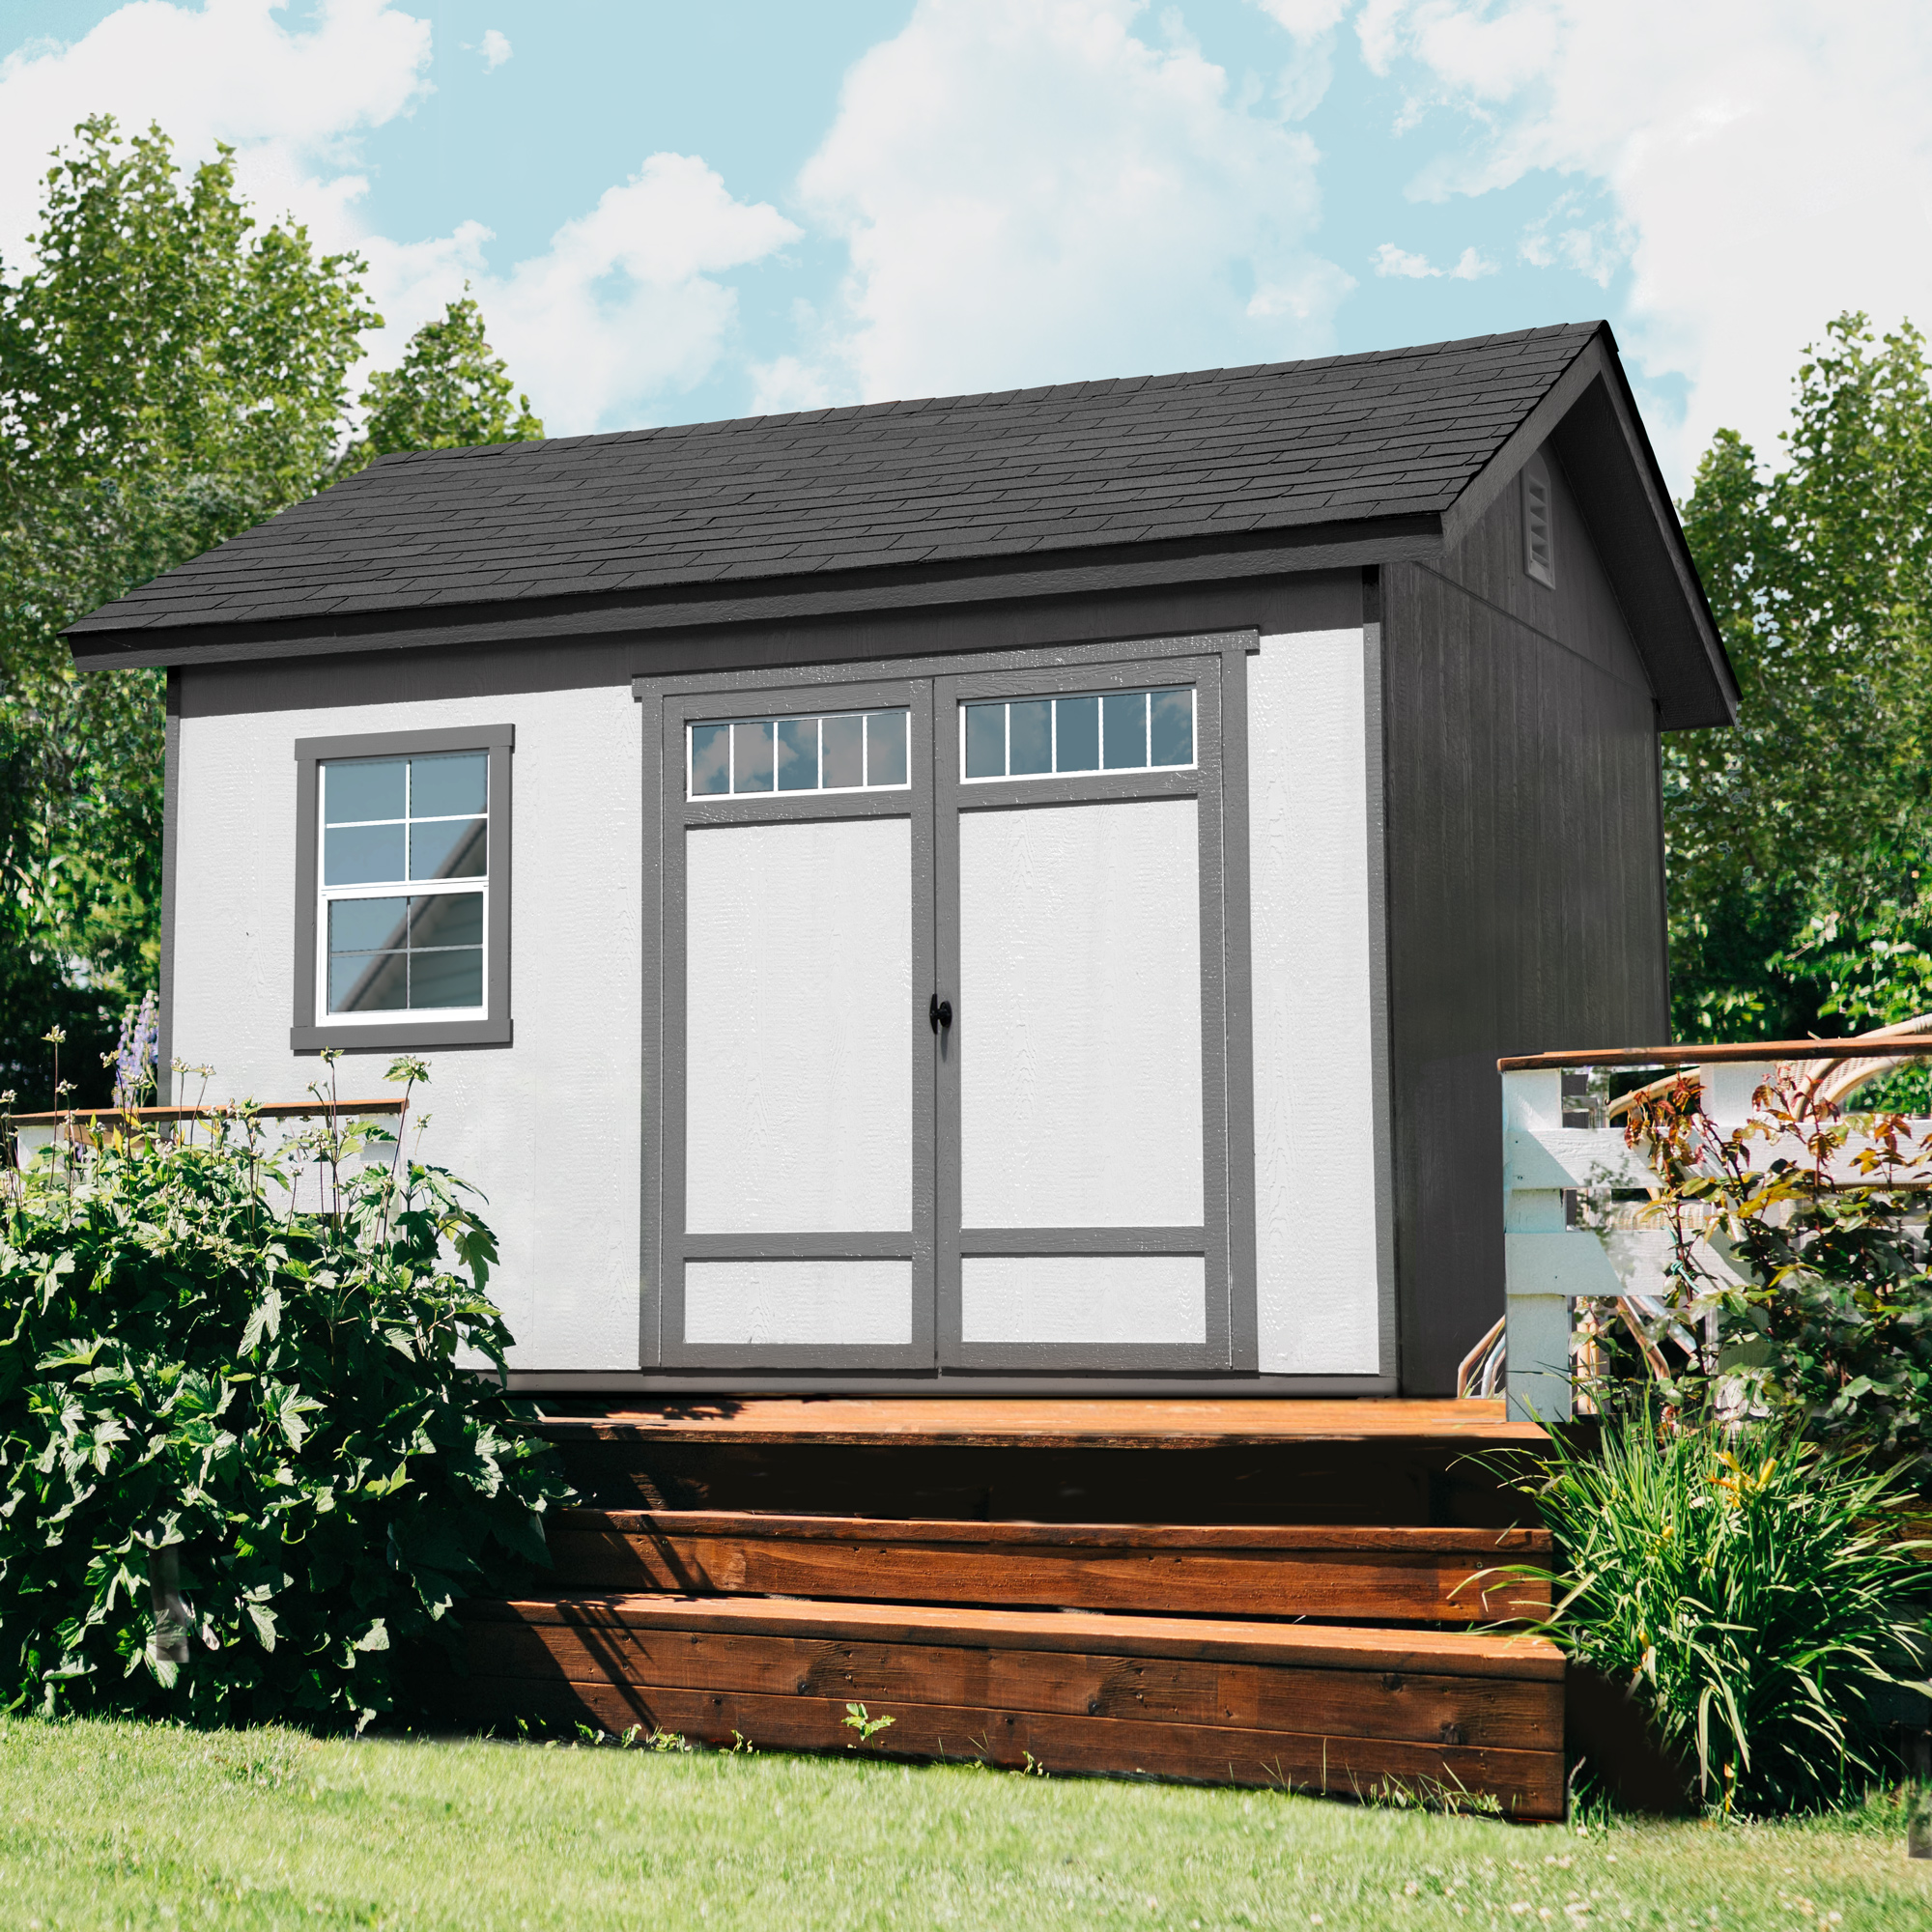 Downsize your space by turning a small shed from Walmart into a tiny home. Pictured: A Walmart shed.